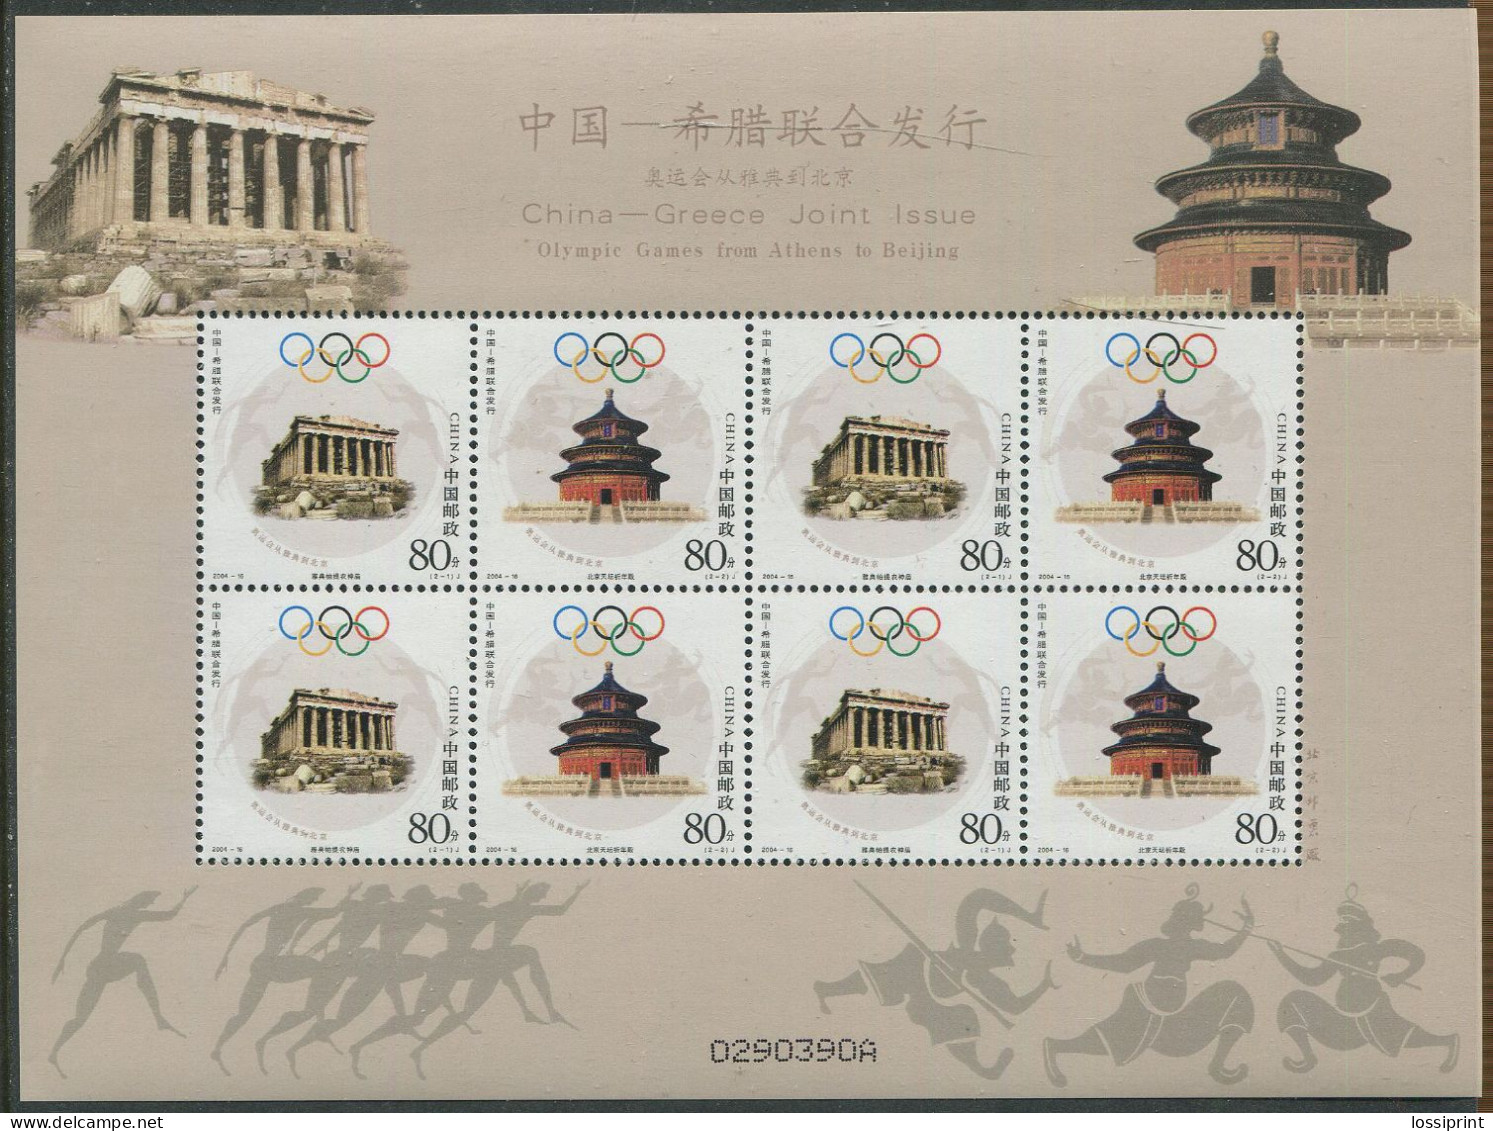 China:Greece:Unused Block Athens And Beijing Olympic Games, Joint Issue, 2004, MNH - Sommer 2004: Athen